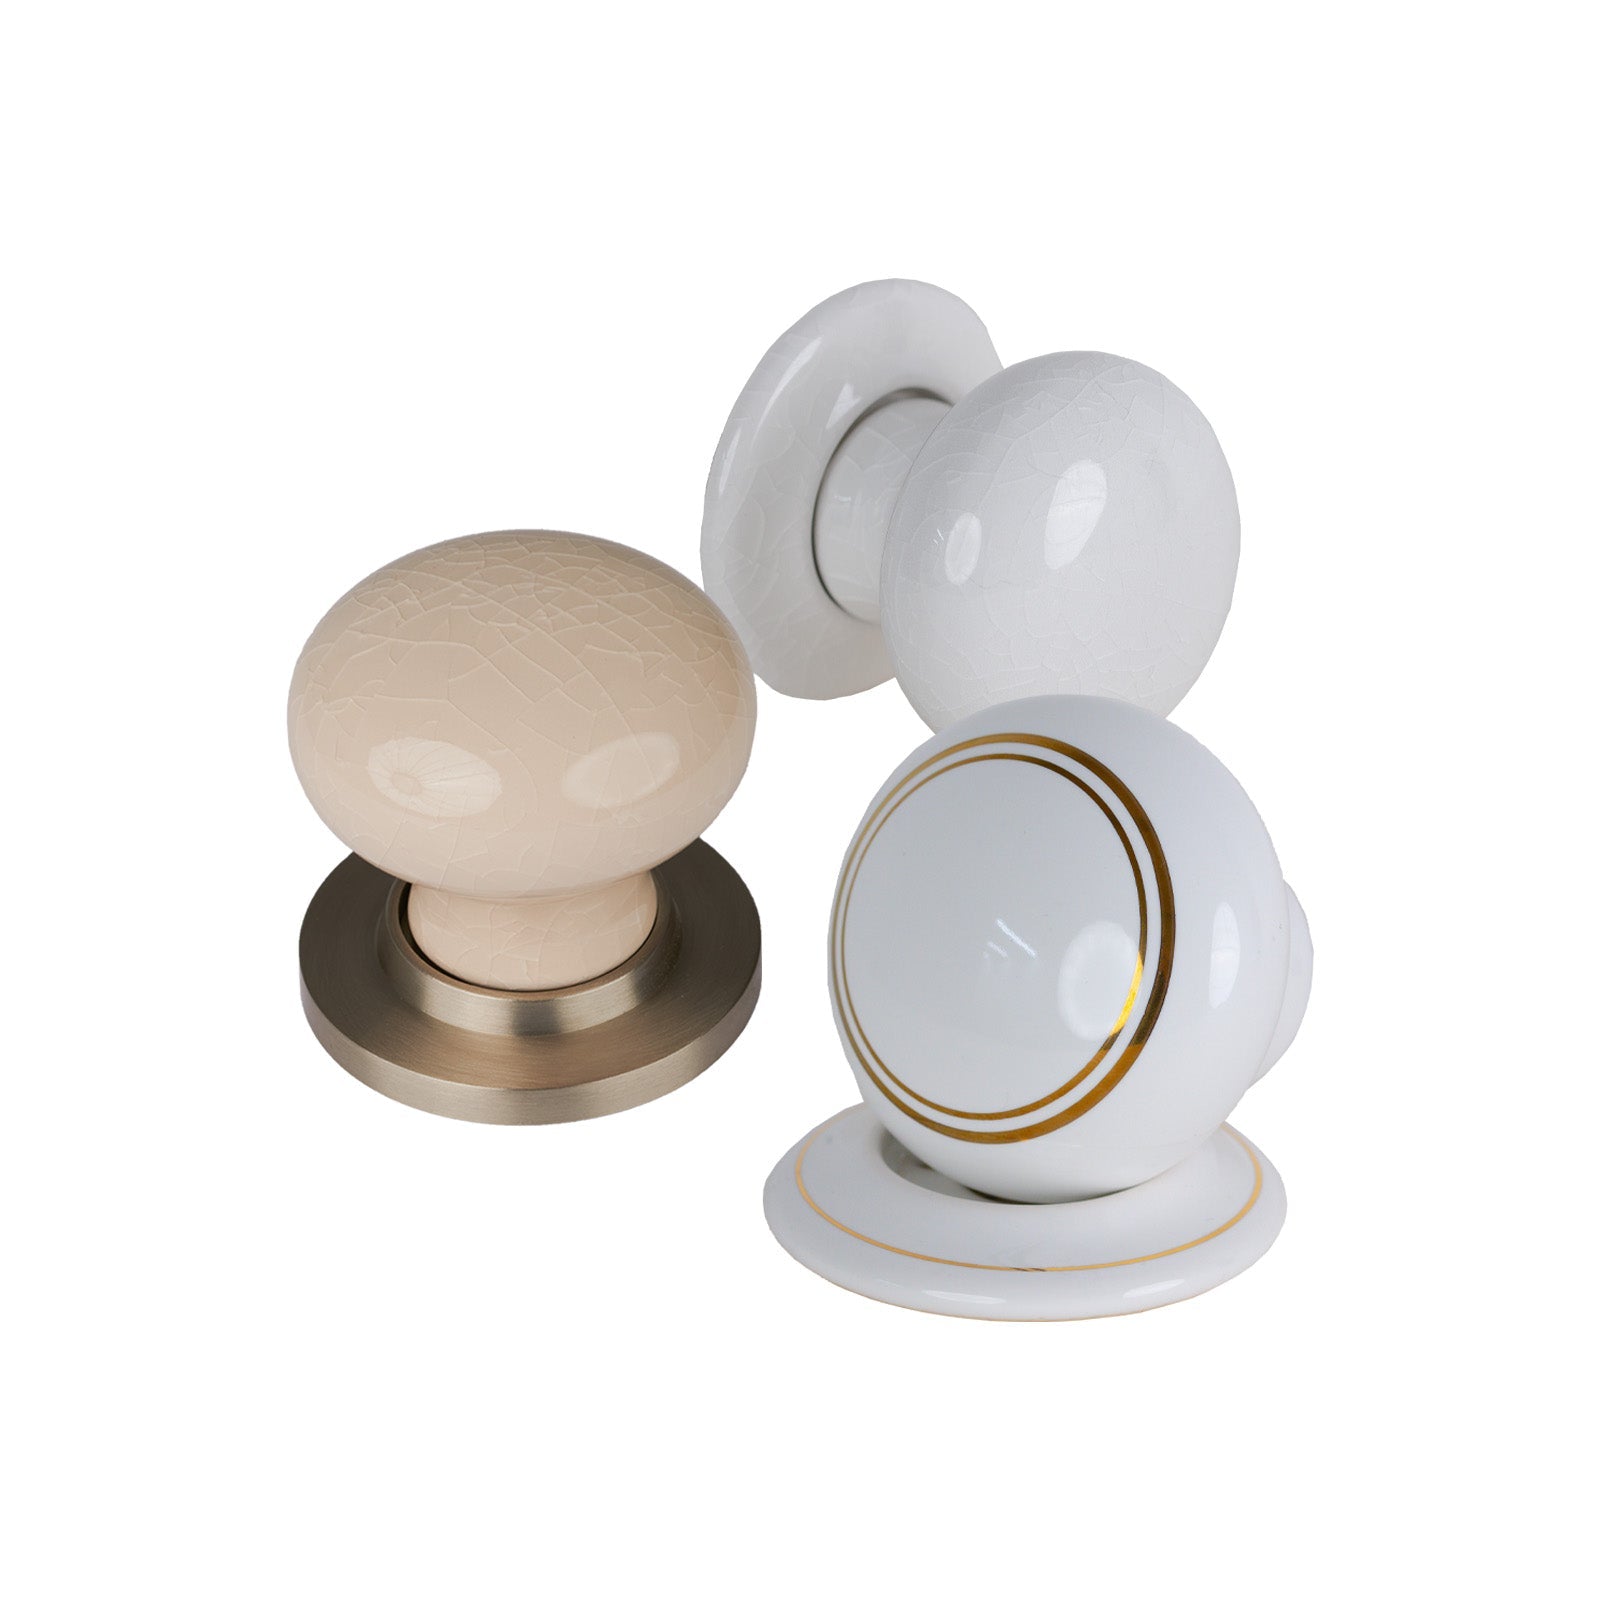 A variety of different porcelain door knobs